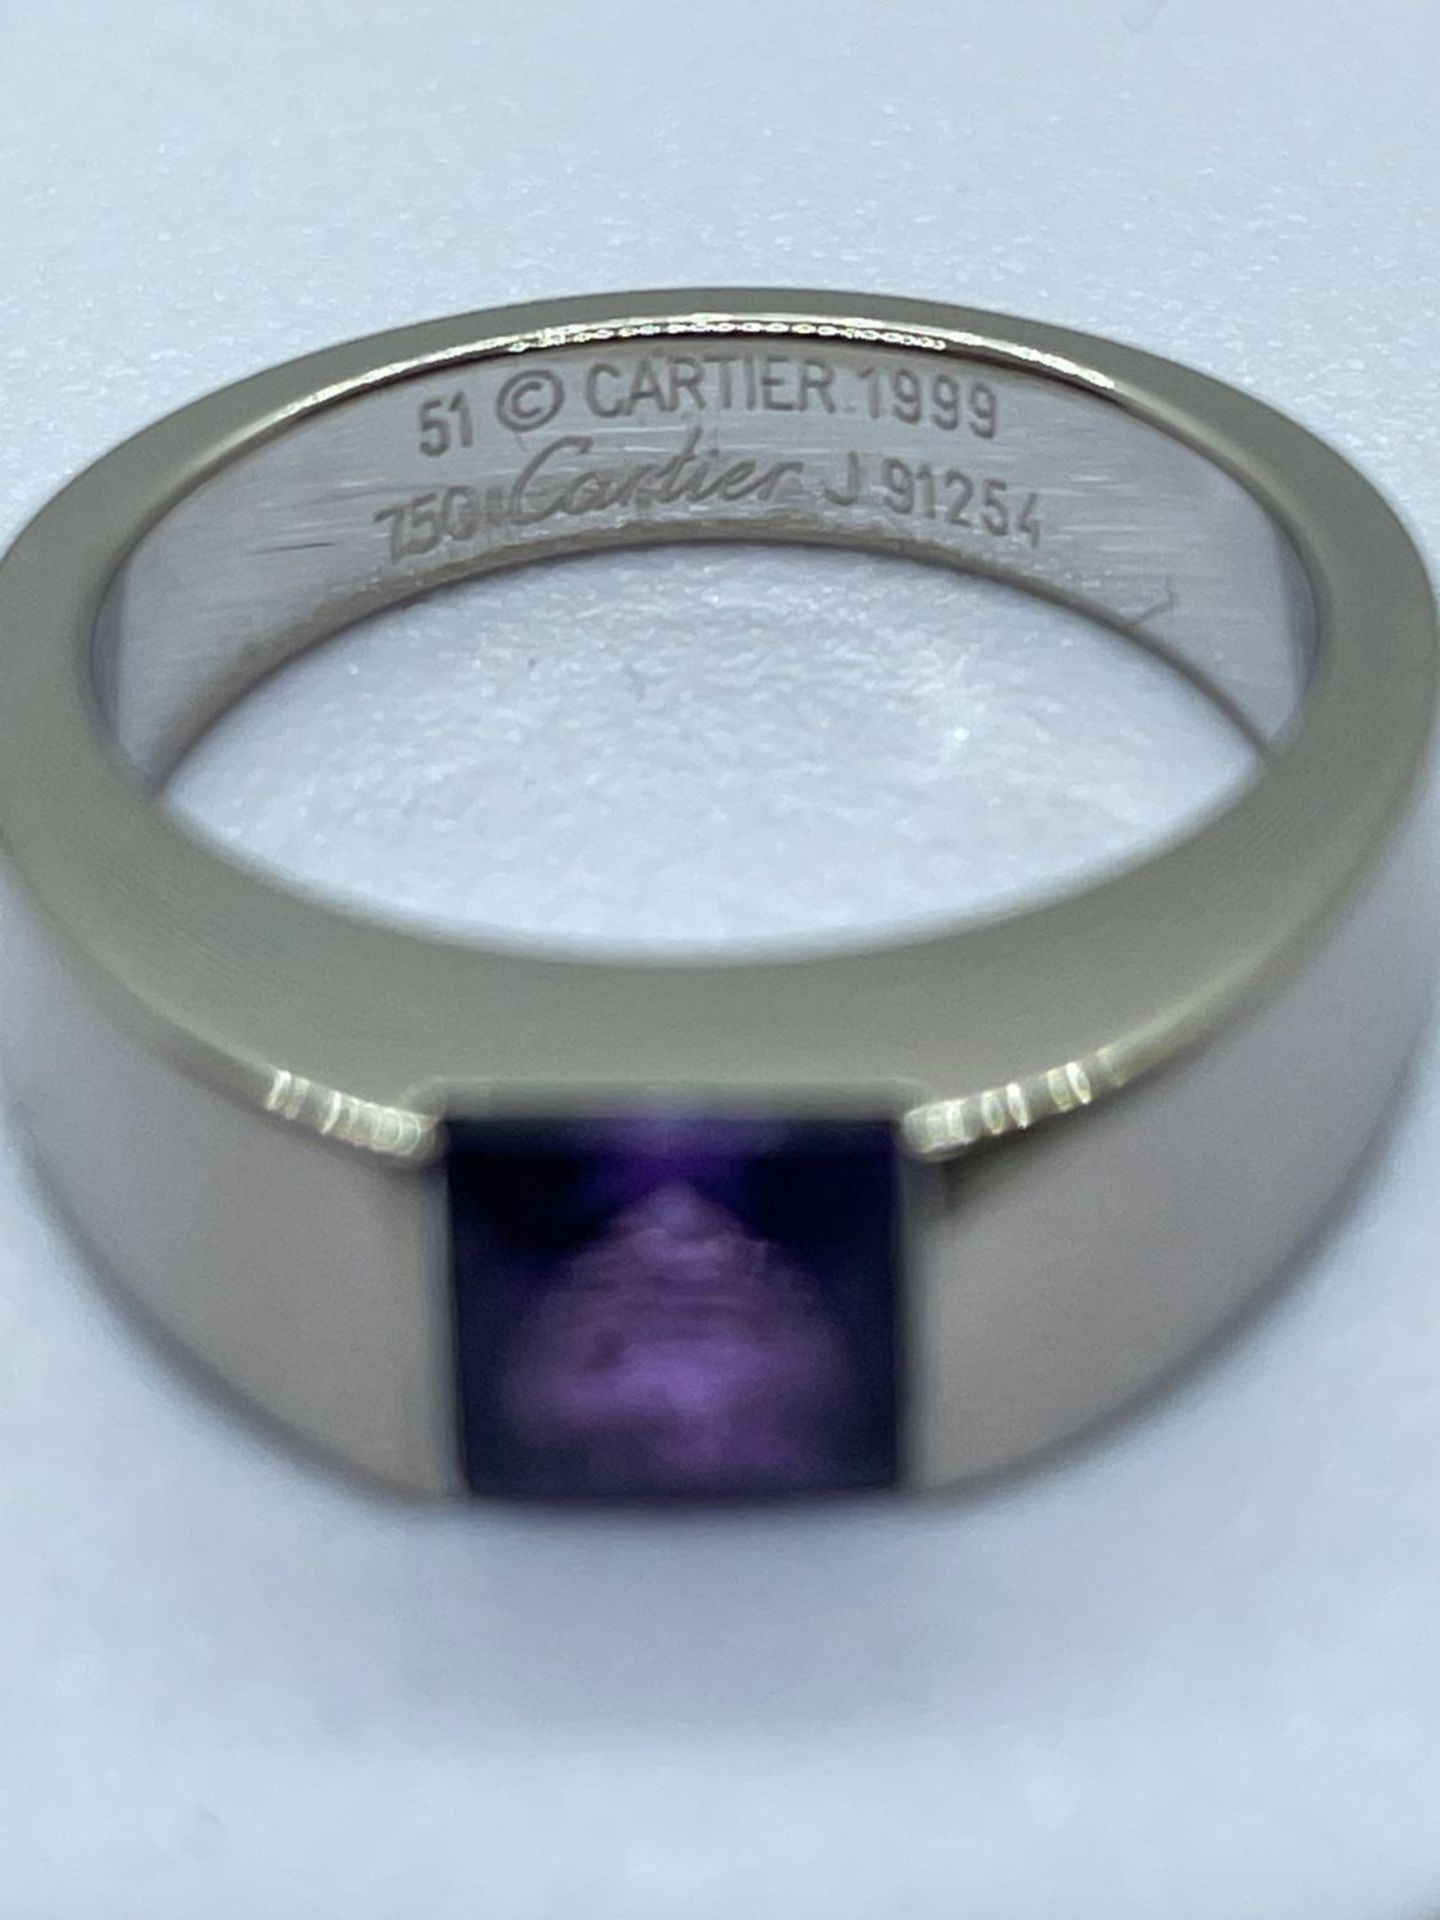 CARTIER - 18K WHITE GOLD / AMETHYST RING WITH BOX & CERTIFICATE - Image 3 of 5